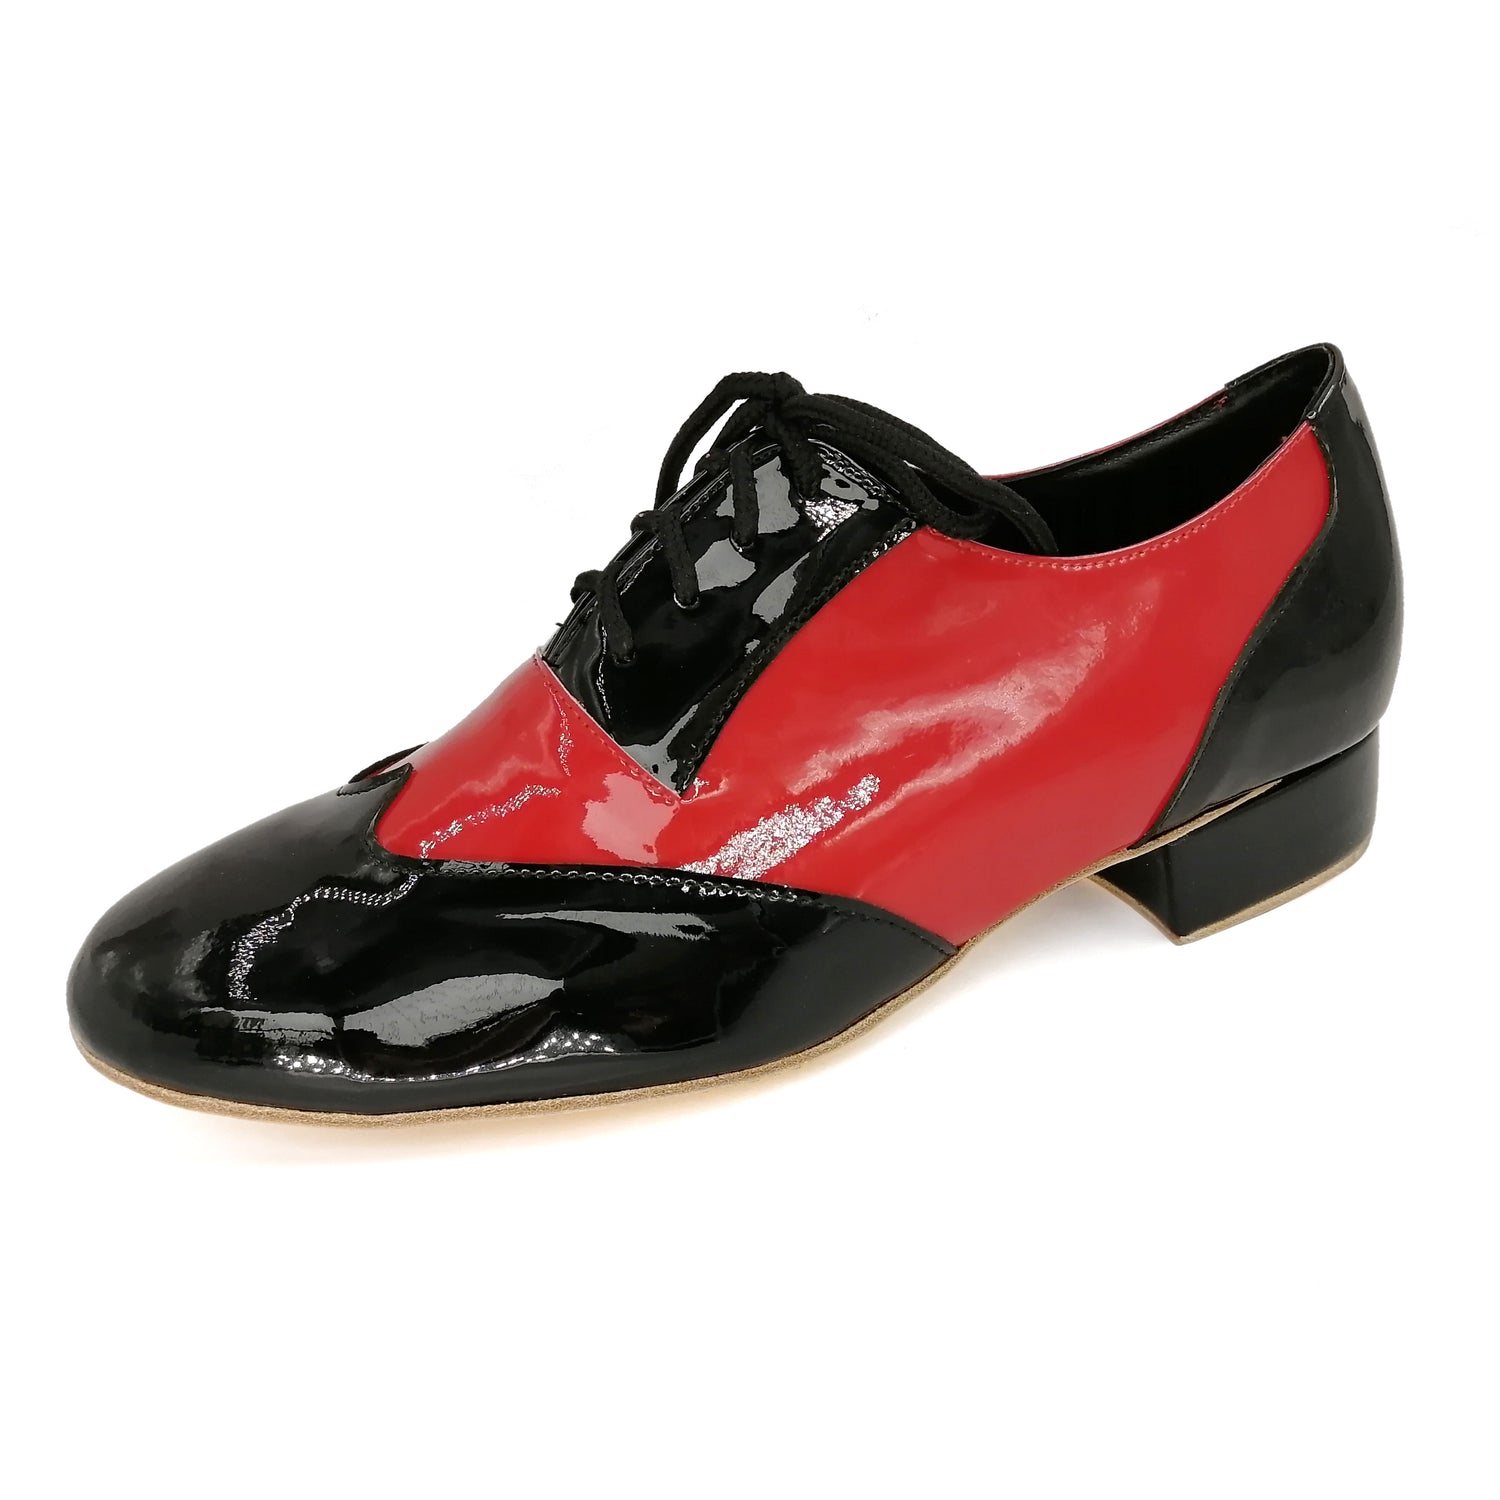 Pro Dancer Men's Tango Shoes with 1 inch Heel Leather Lace-up in Red and Black0